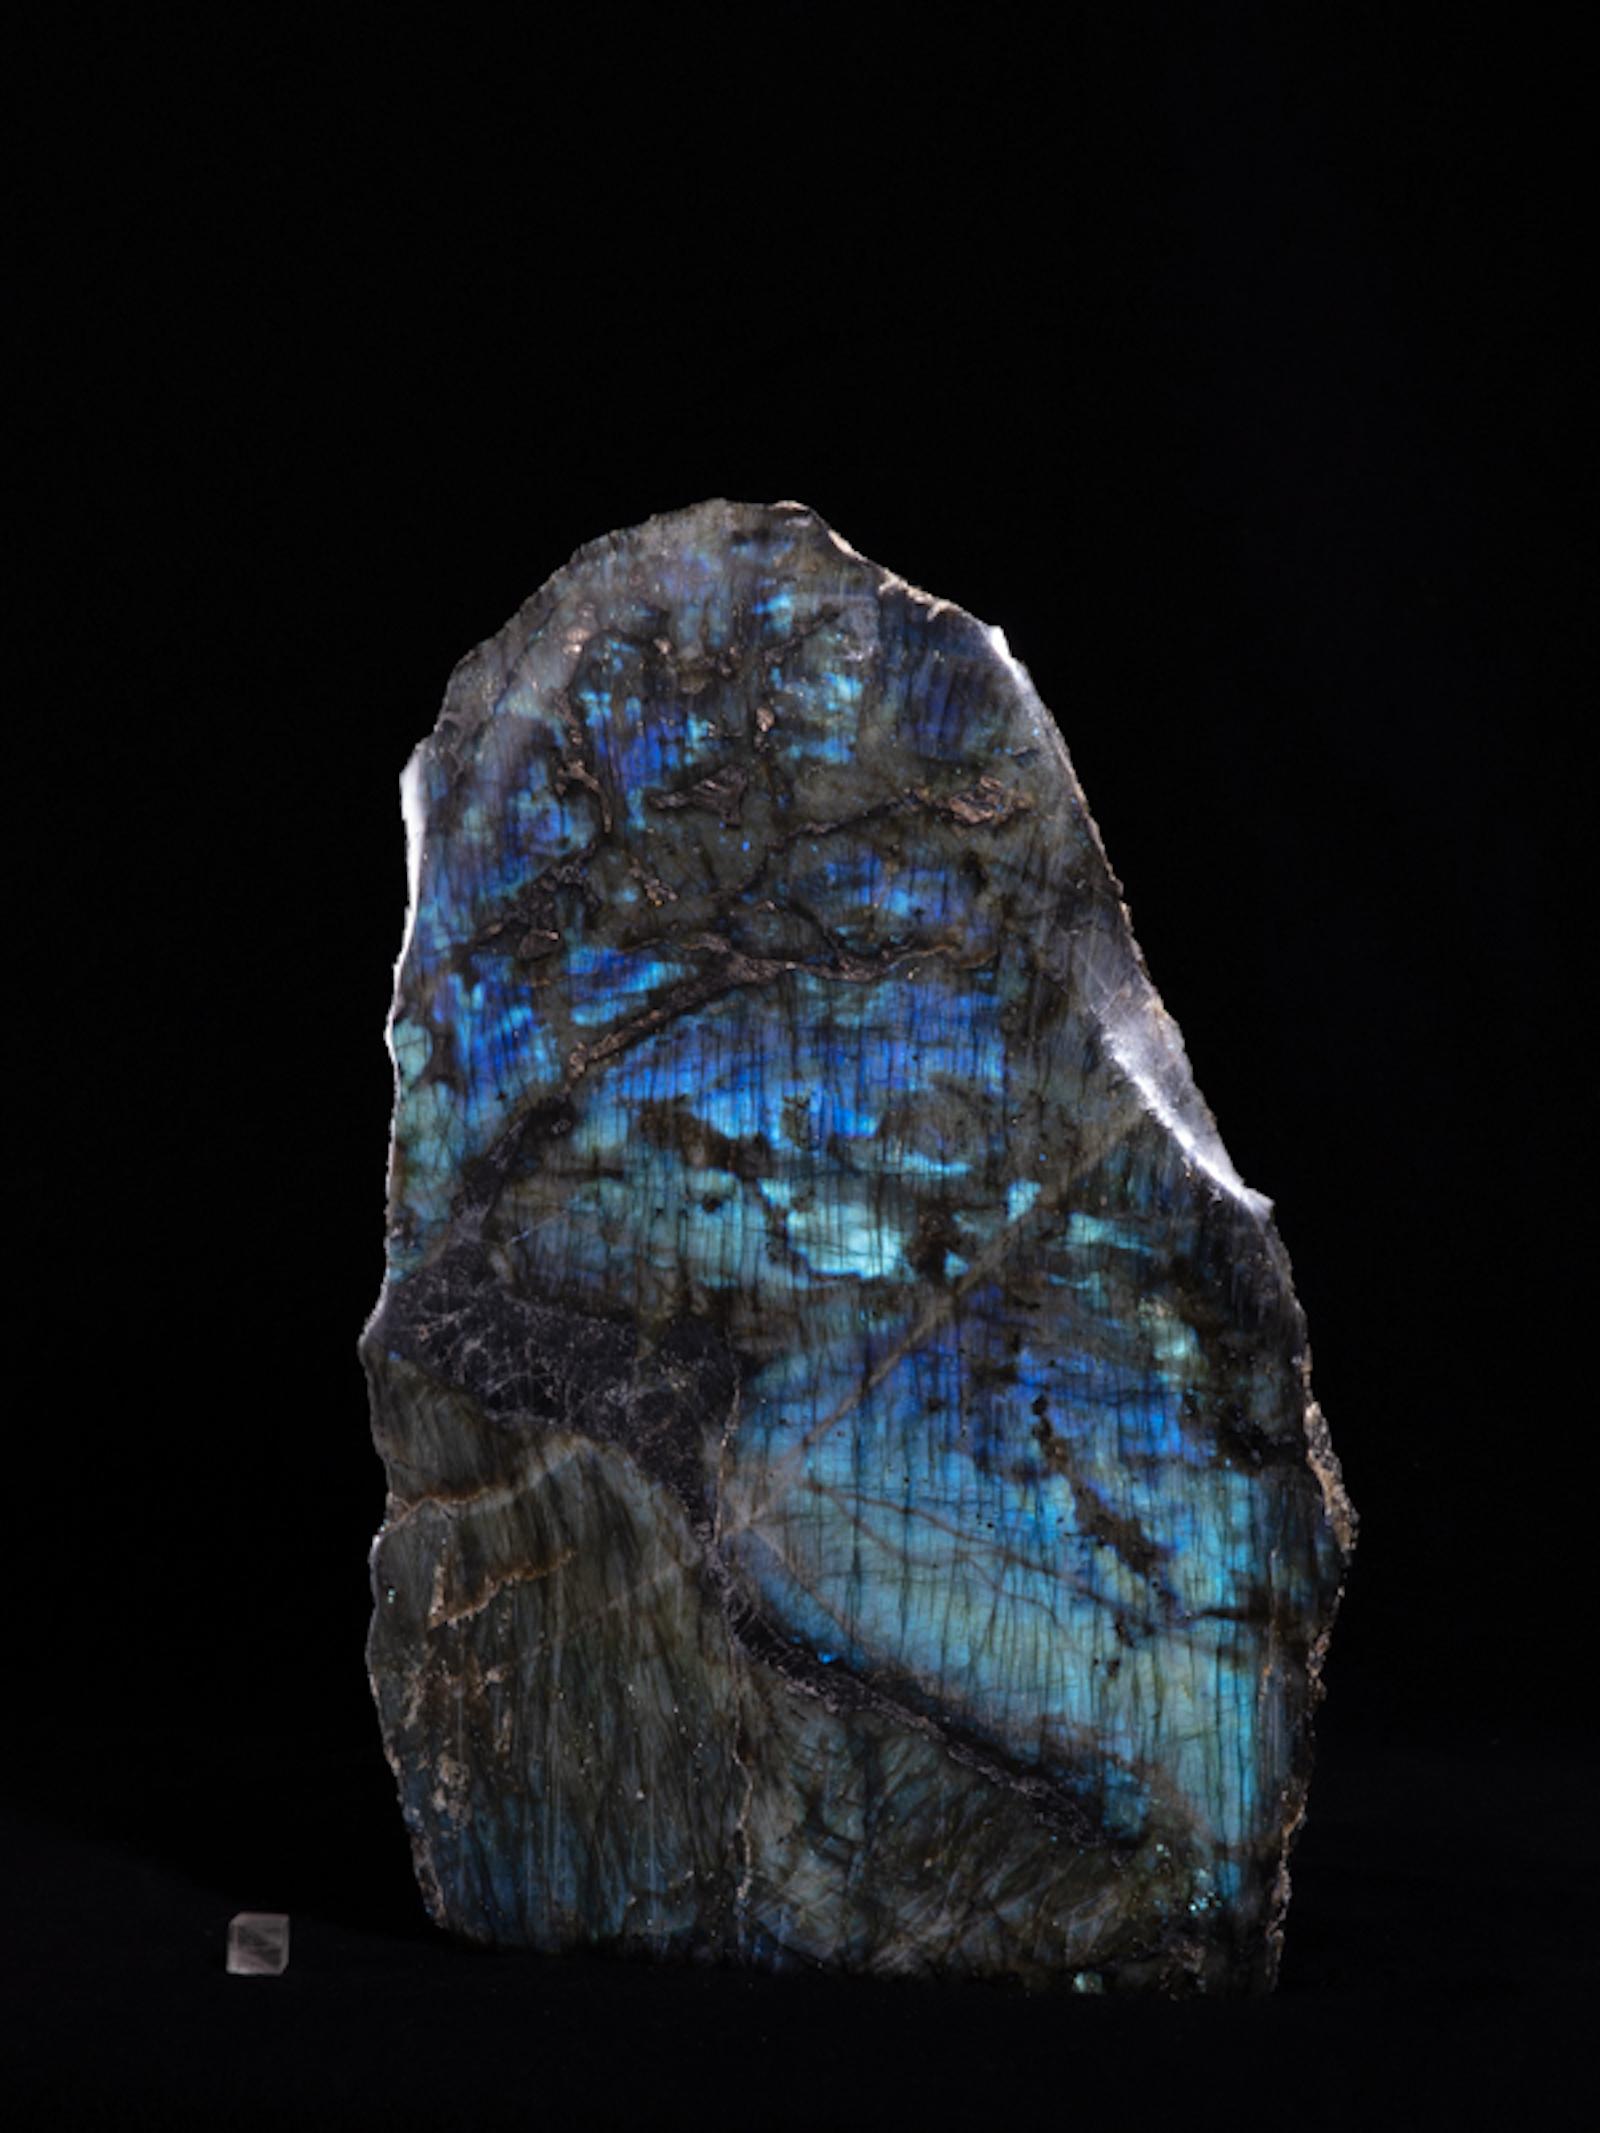 Labradorite is named after the Canadian peninsula of Labrador where the rock was first found and described.
It is a plagioclase feldspar that rarely if ever forms crystals and if crystals do occur they are almost always fused. One usually finds